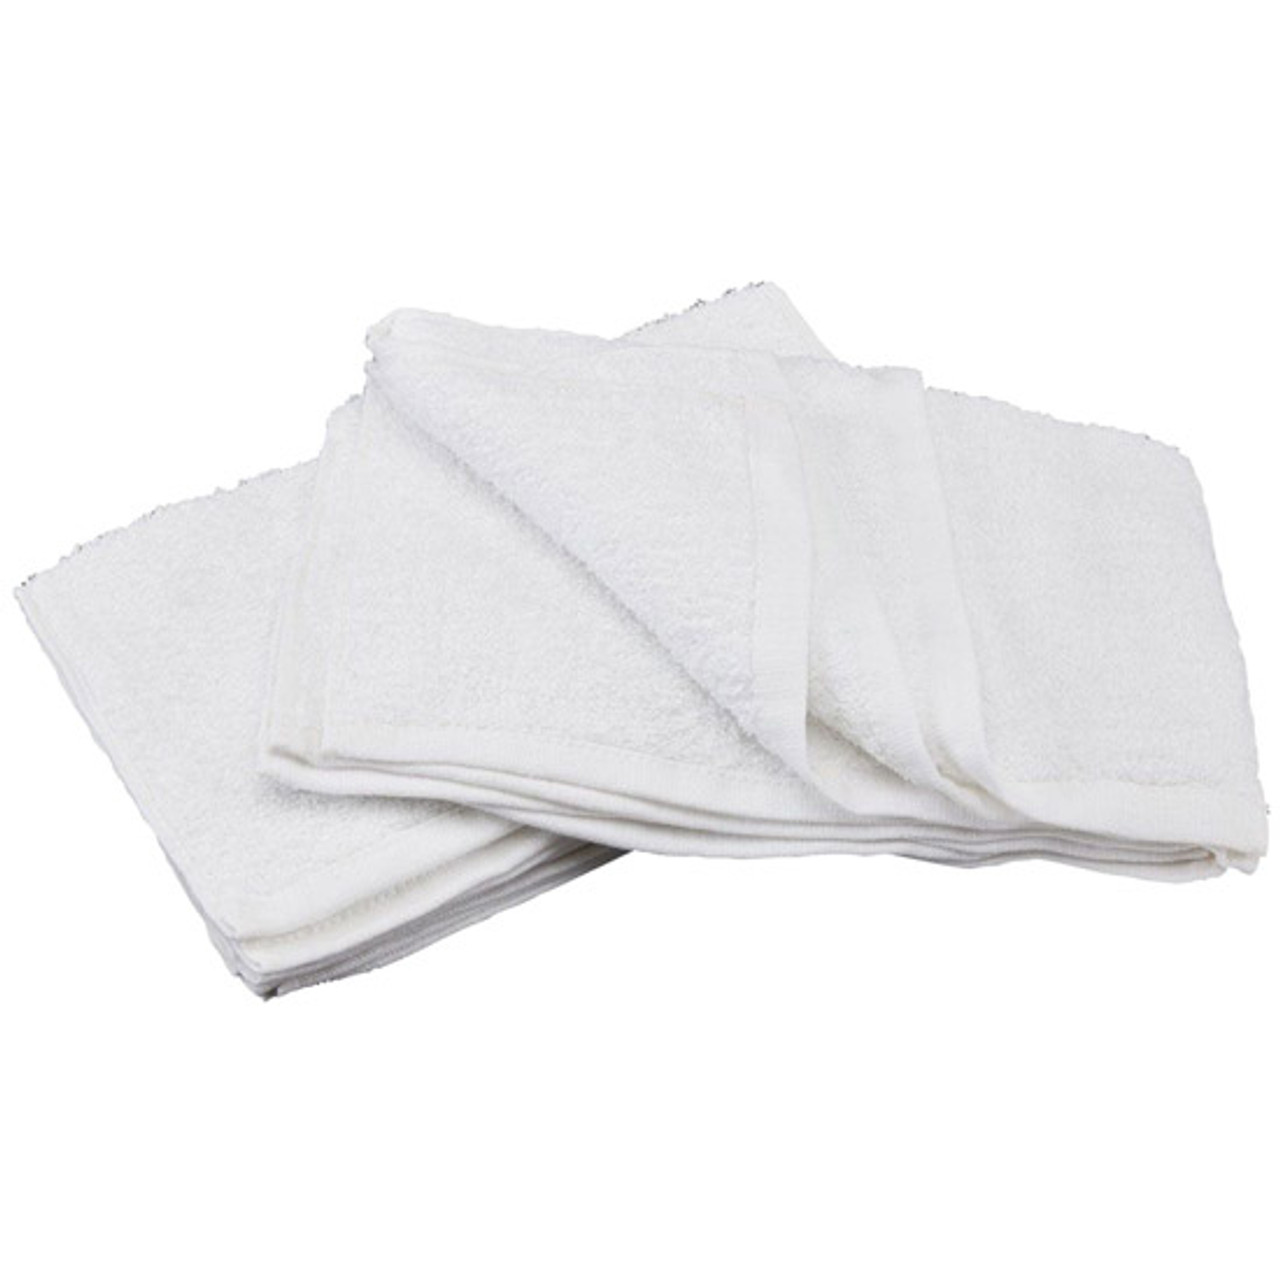 Buffalo 60221 14 x 17 Terry Towels 24 Count